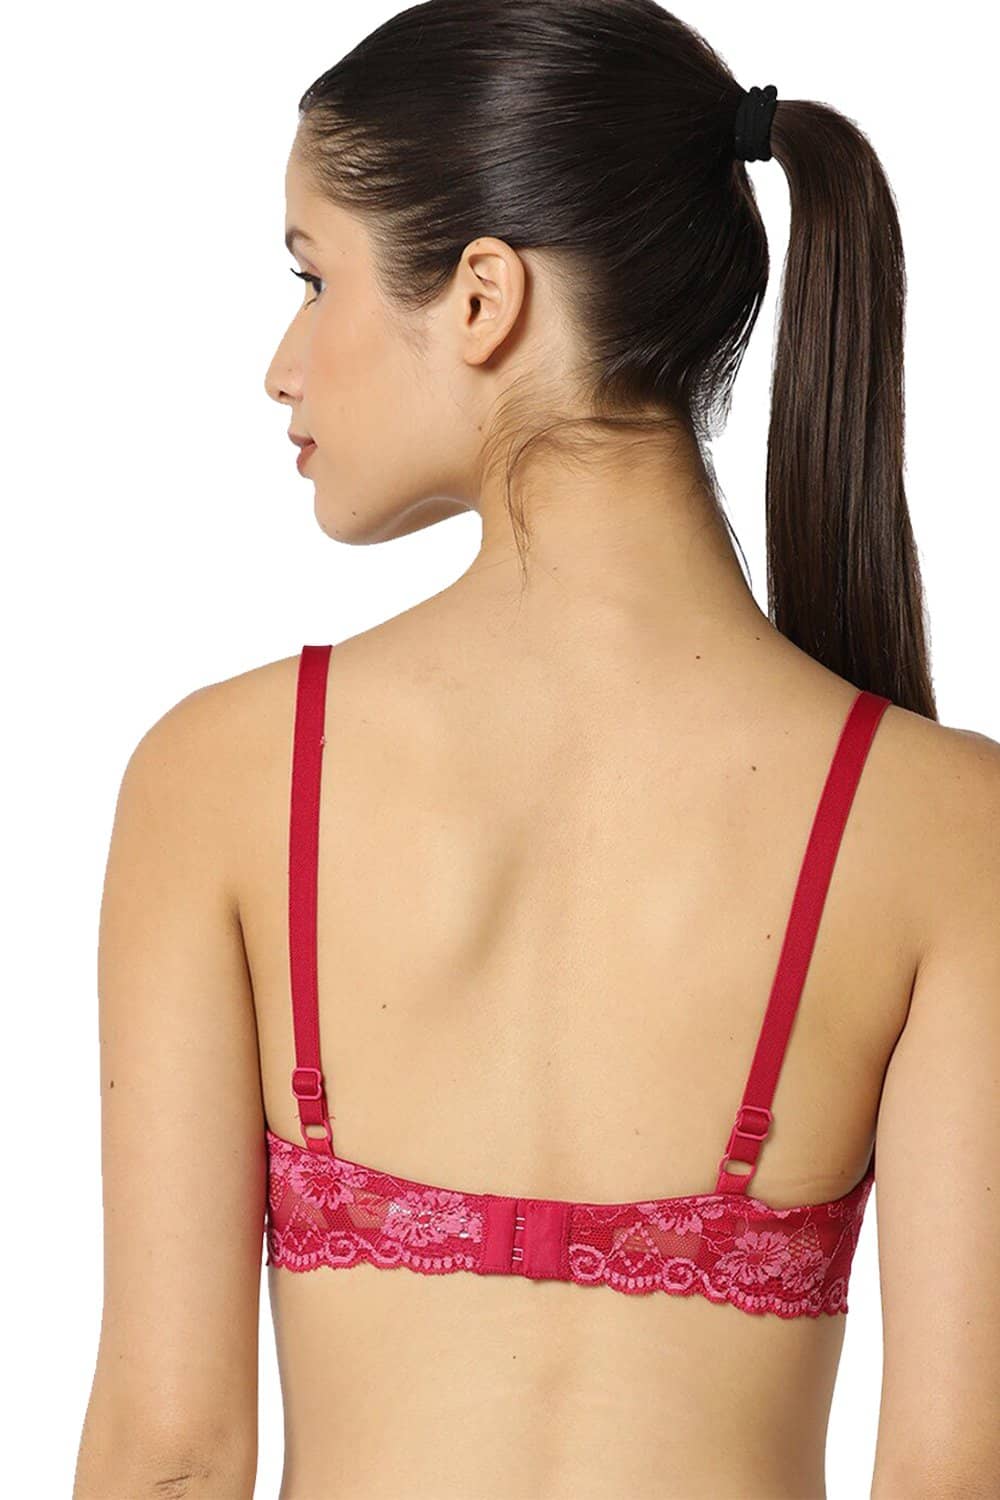 Buy Inner Sense Organic Cotton Padded Underwired Lace Bras ( Pack